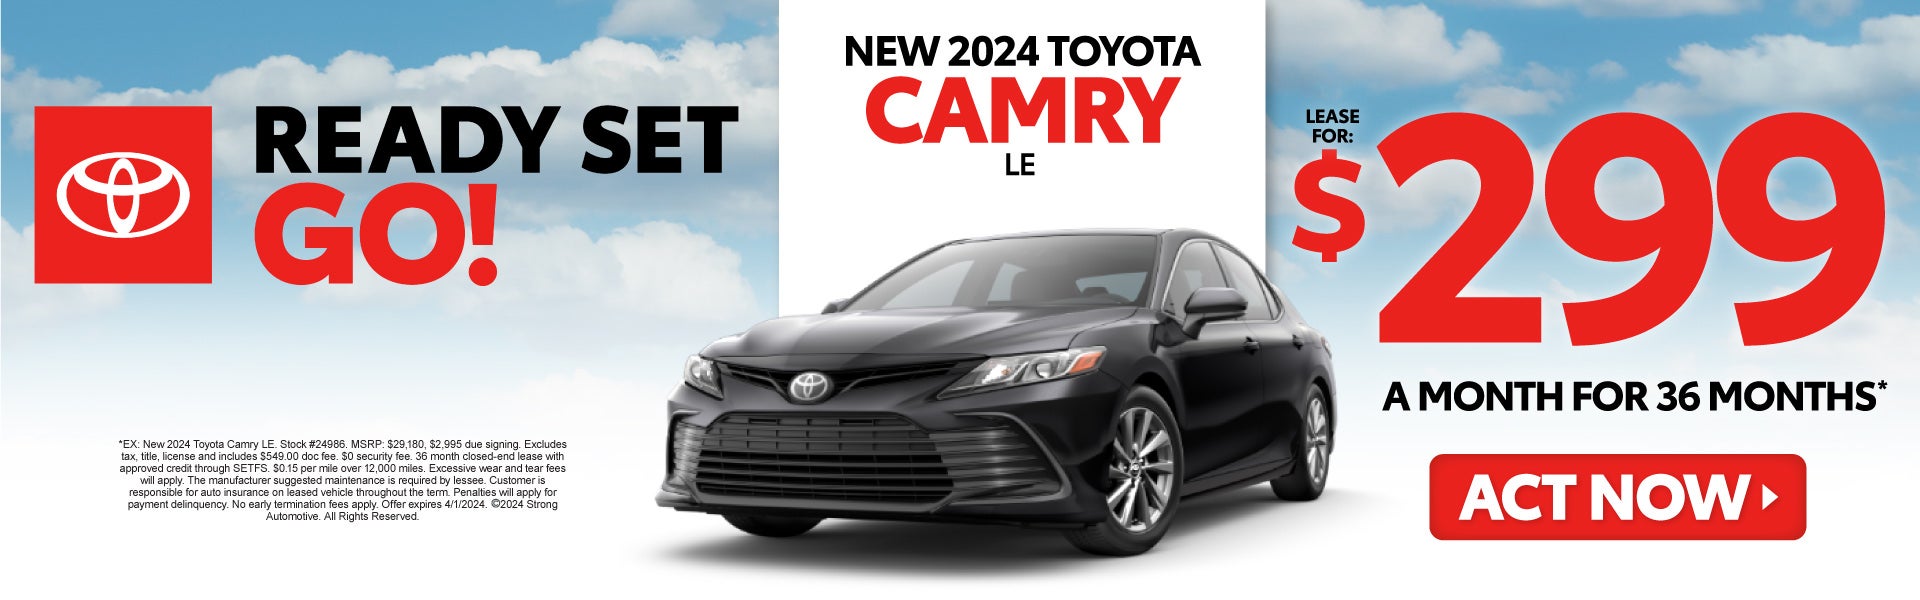 New 2024 Toyota Camry Le $299/mo for 36 months* - Act Now